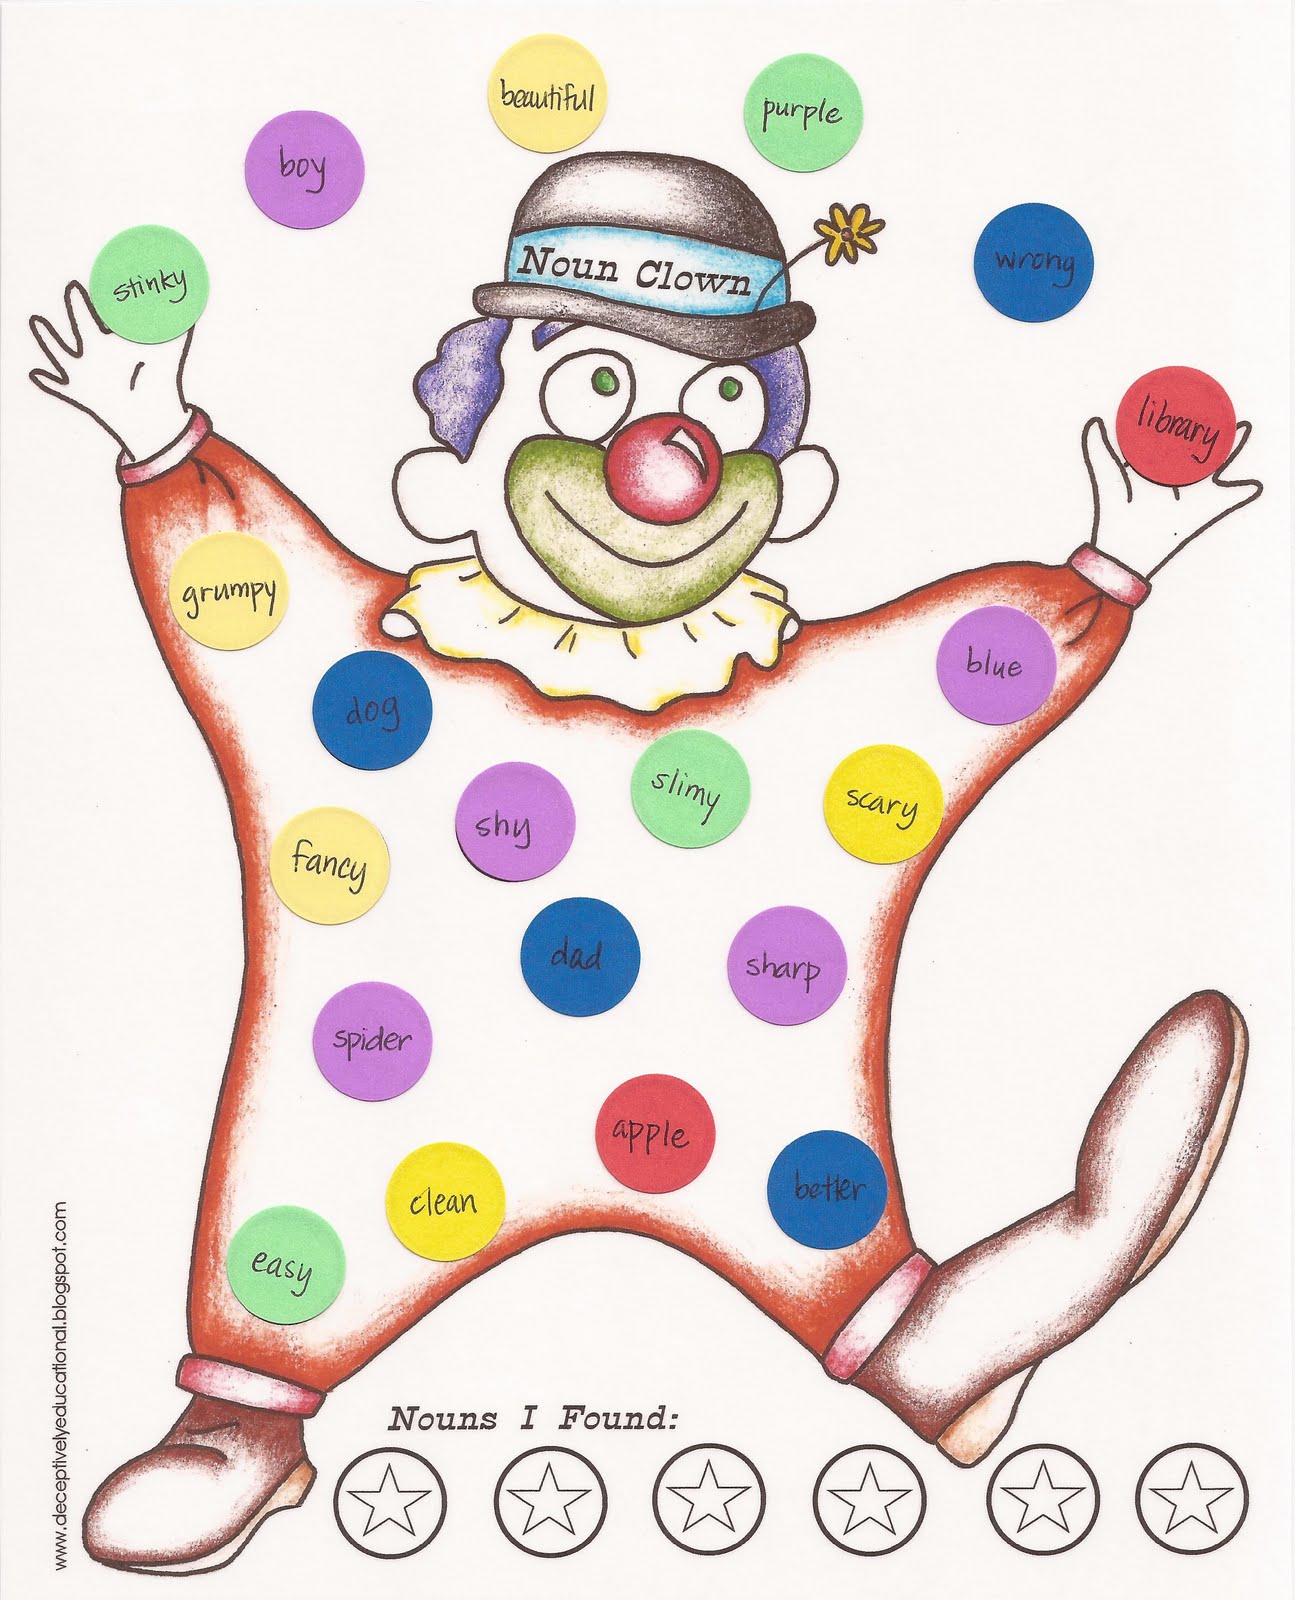 relentlessly-fun-deceptively-educational-learning-about-nouns-with-noun-clown